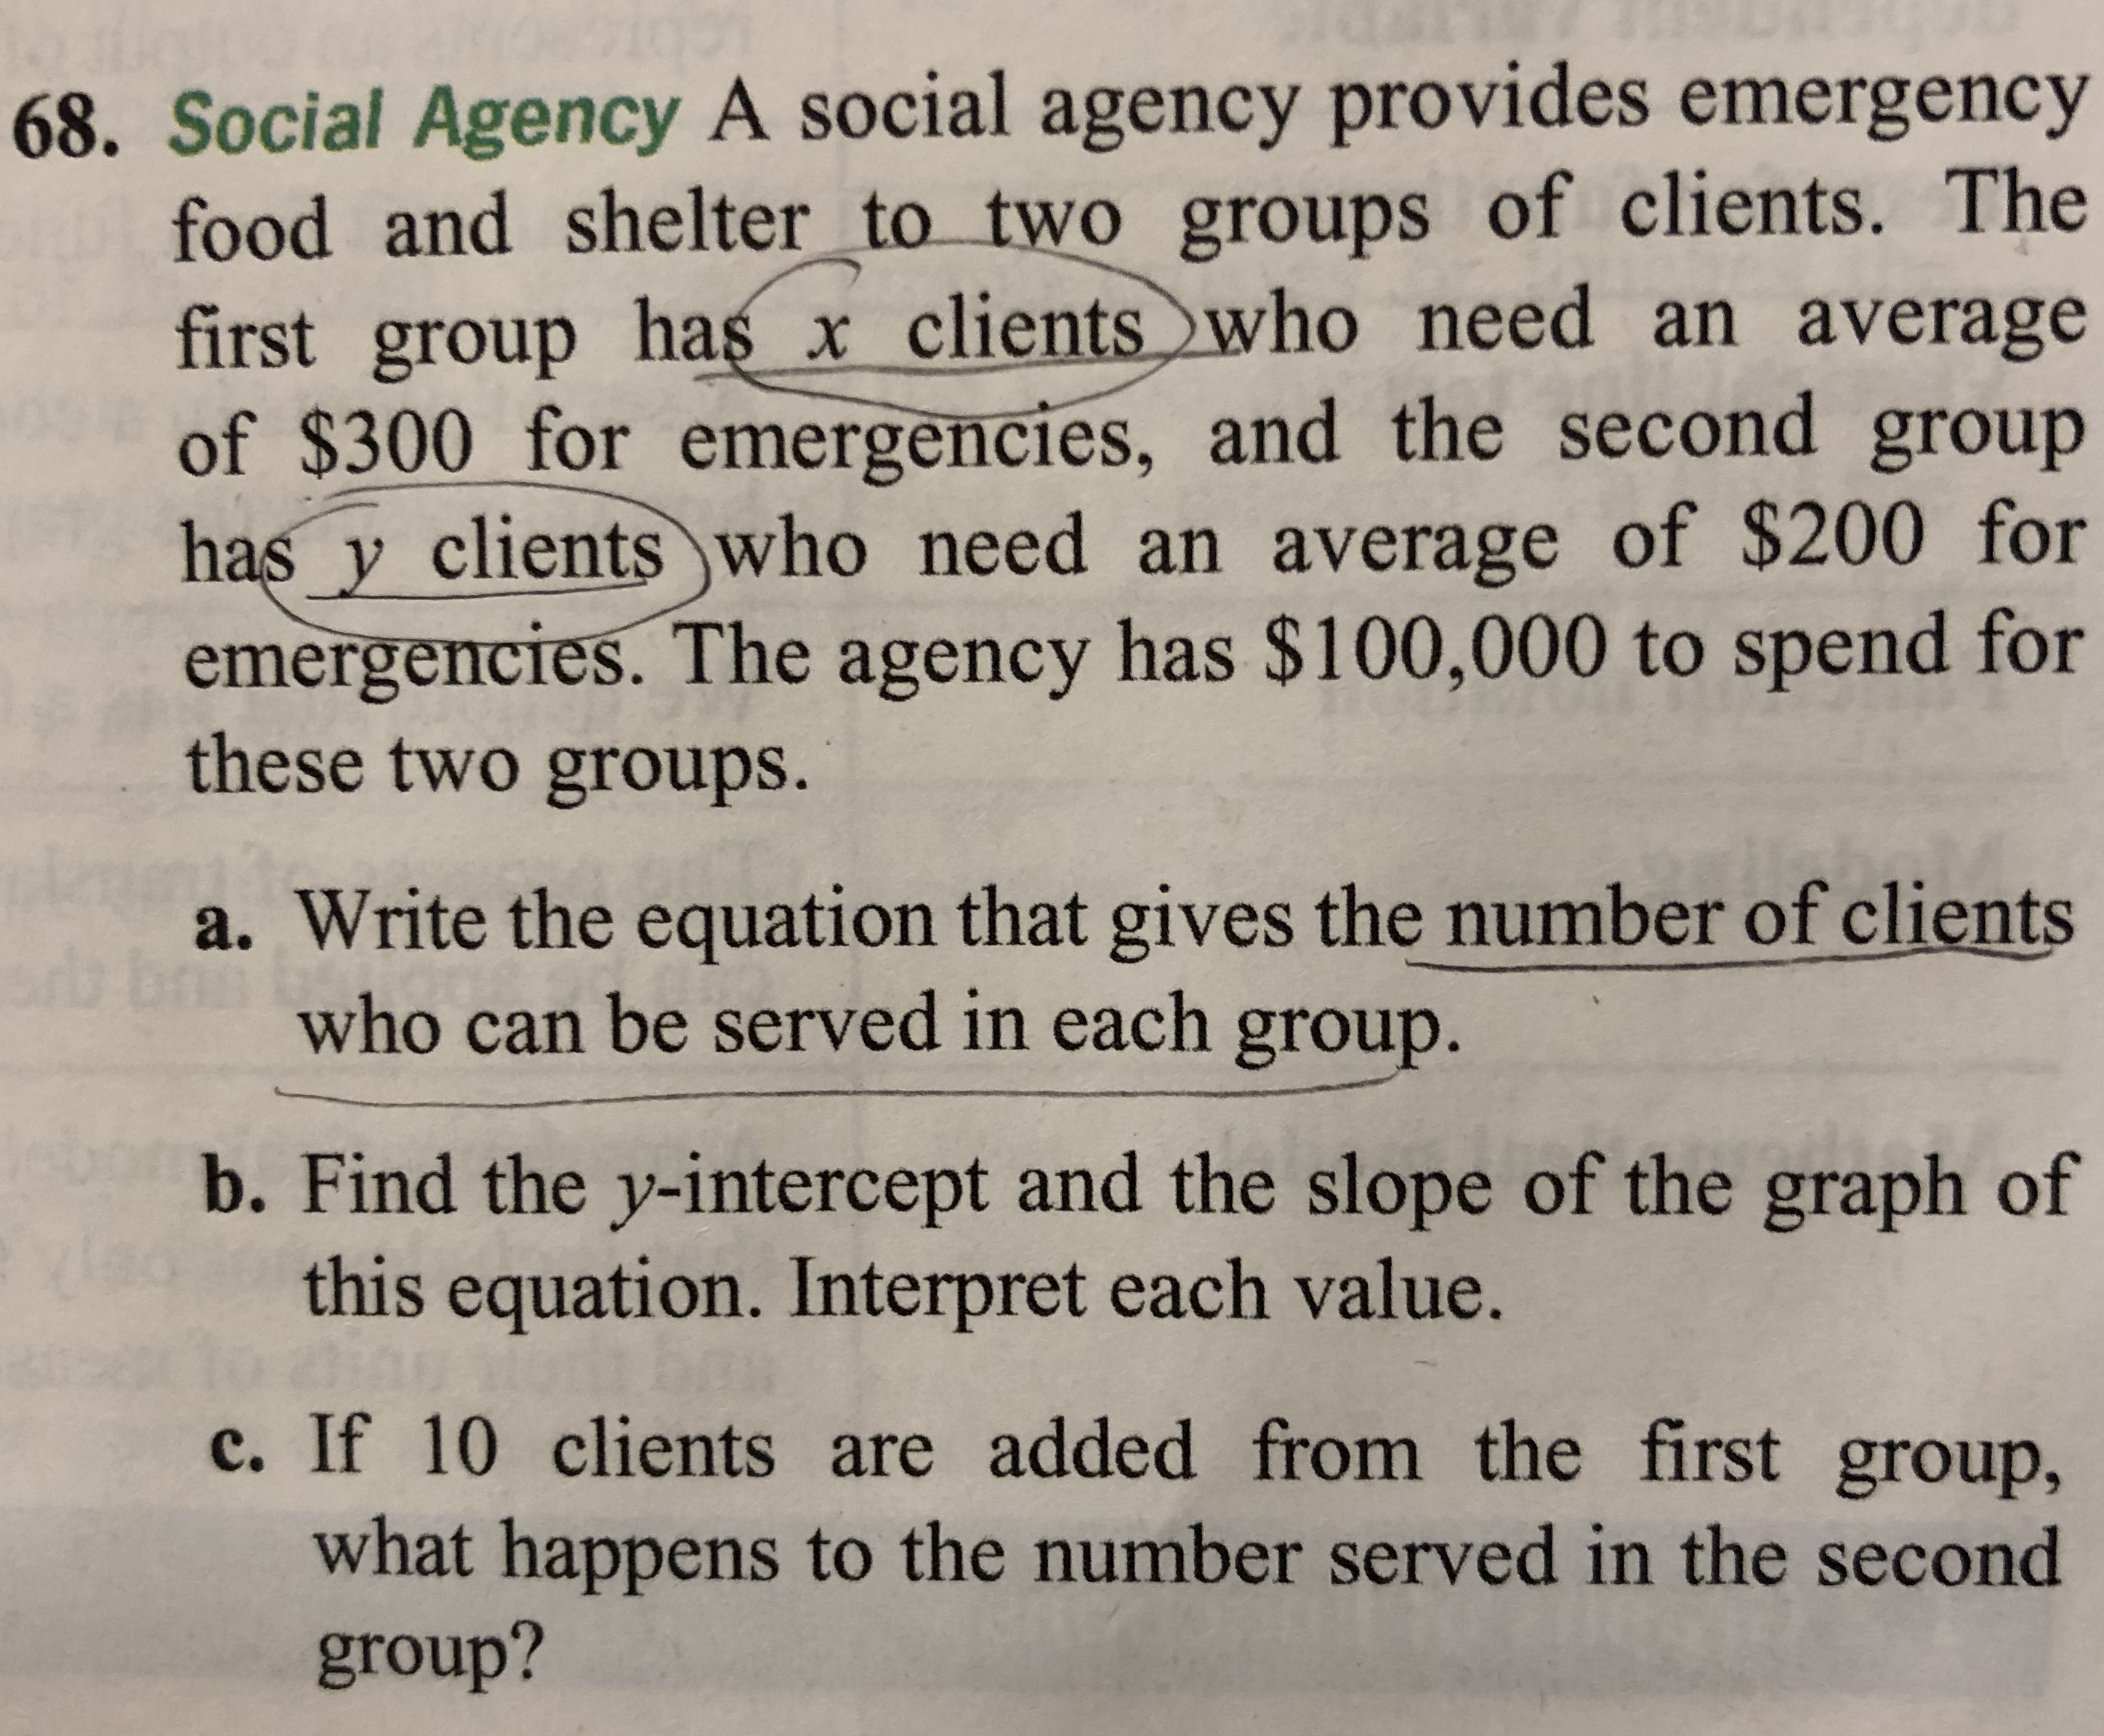 68. Social Agency A social agency provides emergency
food and shelter_to two groups of clients. The
first group has x clientswho need an average
of $300 for emergencies, and the second group
has y clients who need an average of $200 for
emergencies. The agency has $100,000 to spend for
these two groups.
a. Write the equation that gives the number of clients
who can be served in each group.
b. Find the y-intercept and the slope of the graph of
this equation. Interpret each value.
c. If 10 clients are added from the first group,
what happens to the number served in the second
group?
